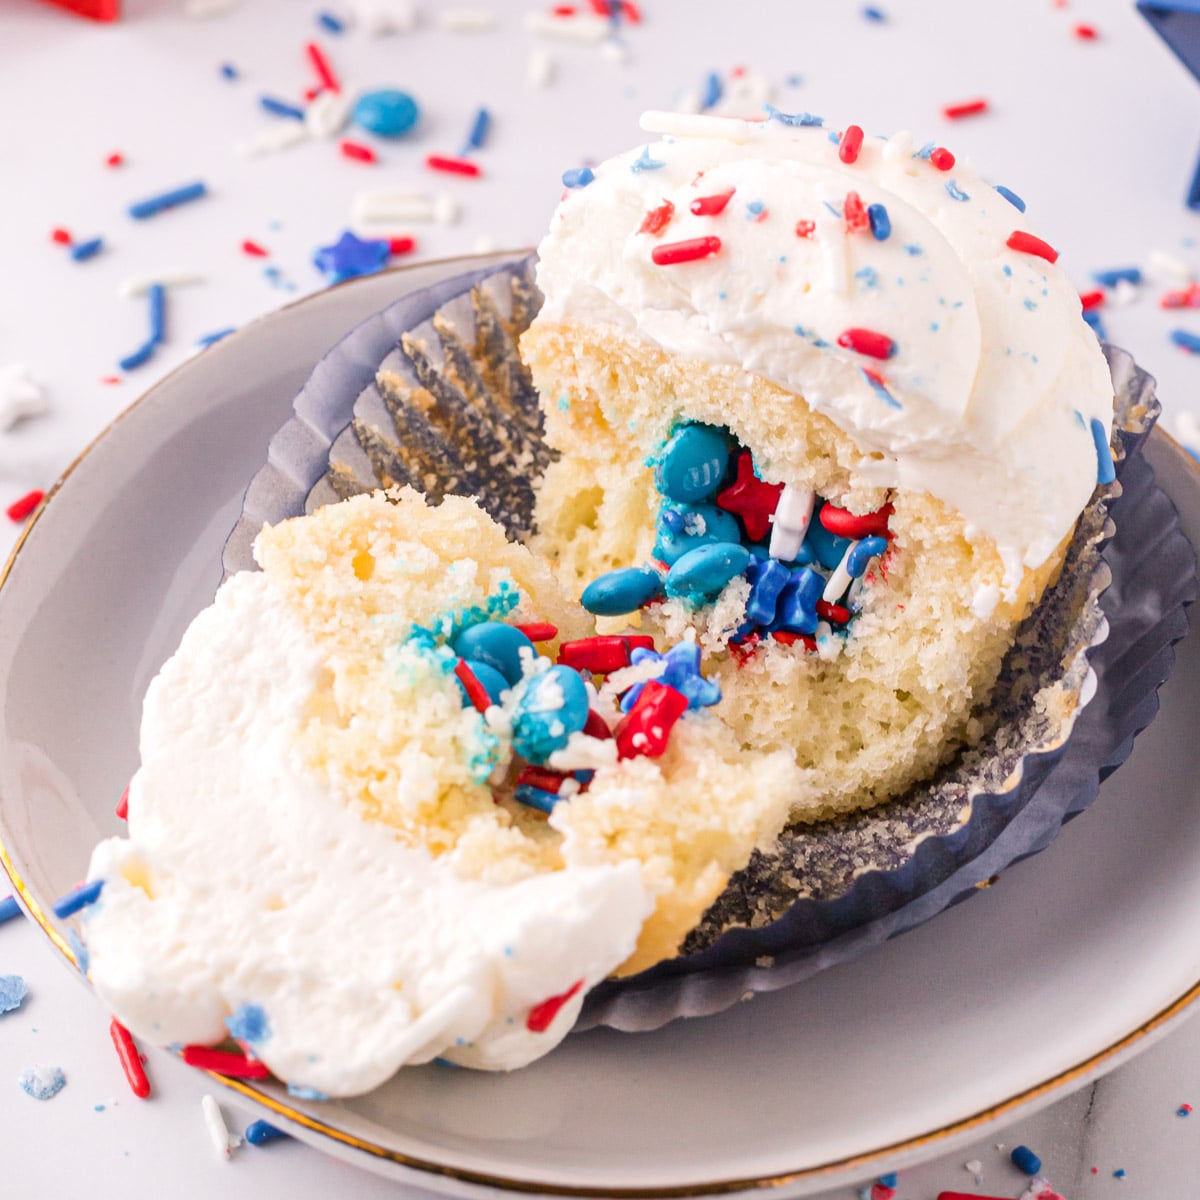 july 4th cupcakes filled with sprinkles on a plate